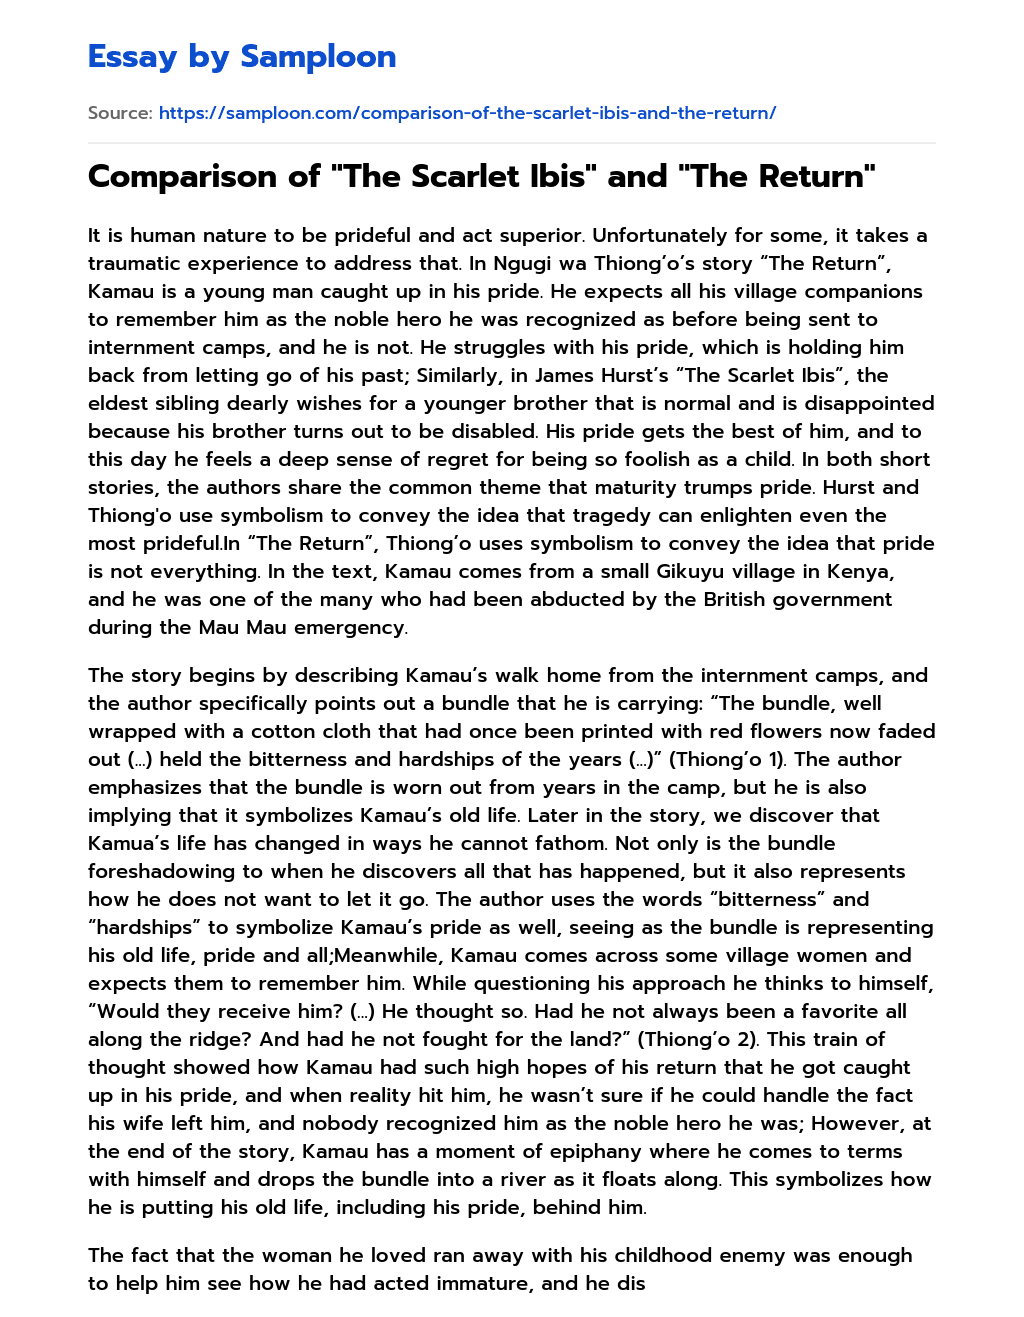 Comparison of “The Scarlet Ibis” and “The Return” essay